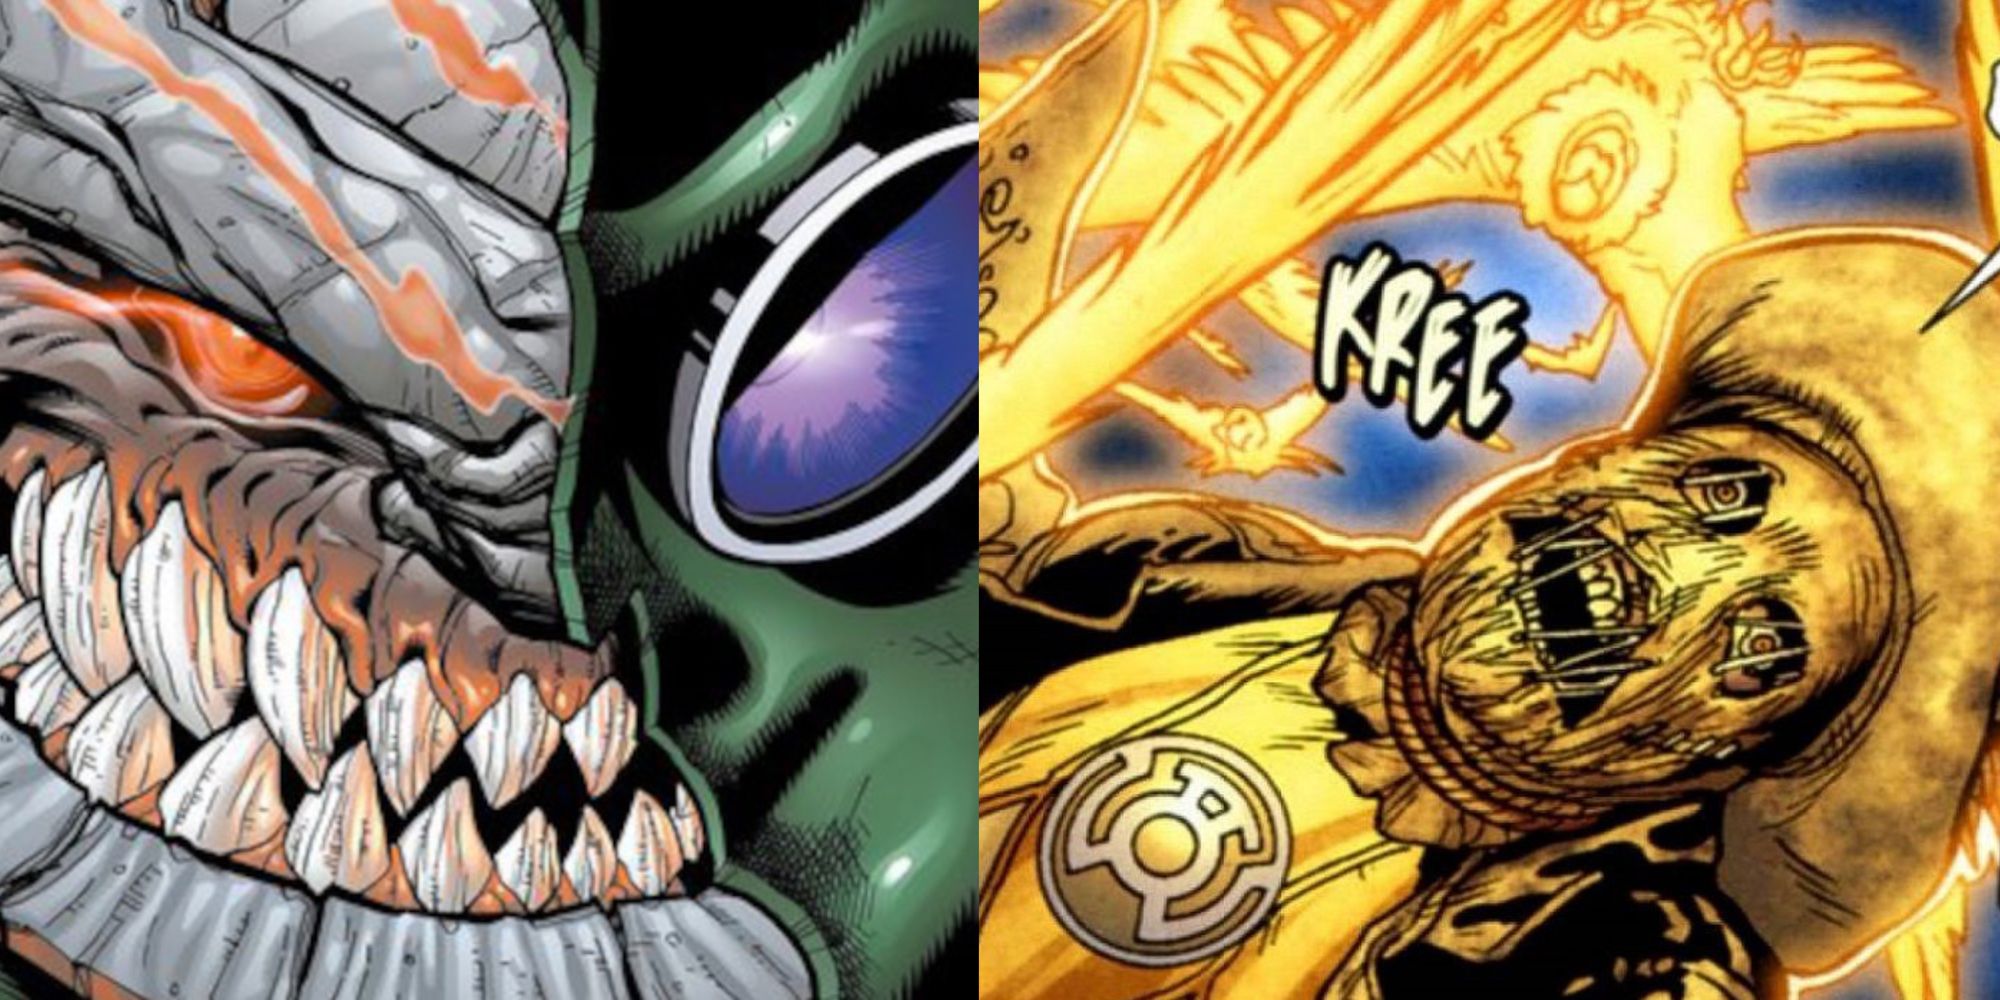 Doomsday Rex and scarecrow as one of the sinestro corps